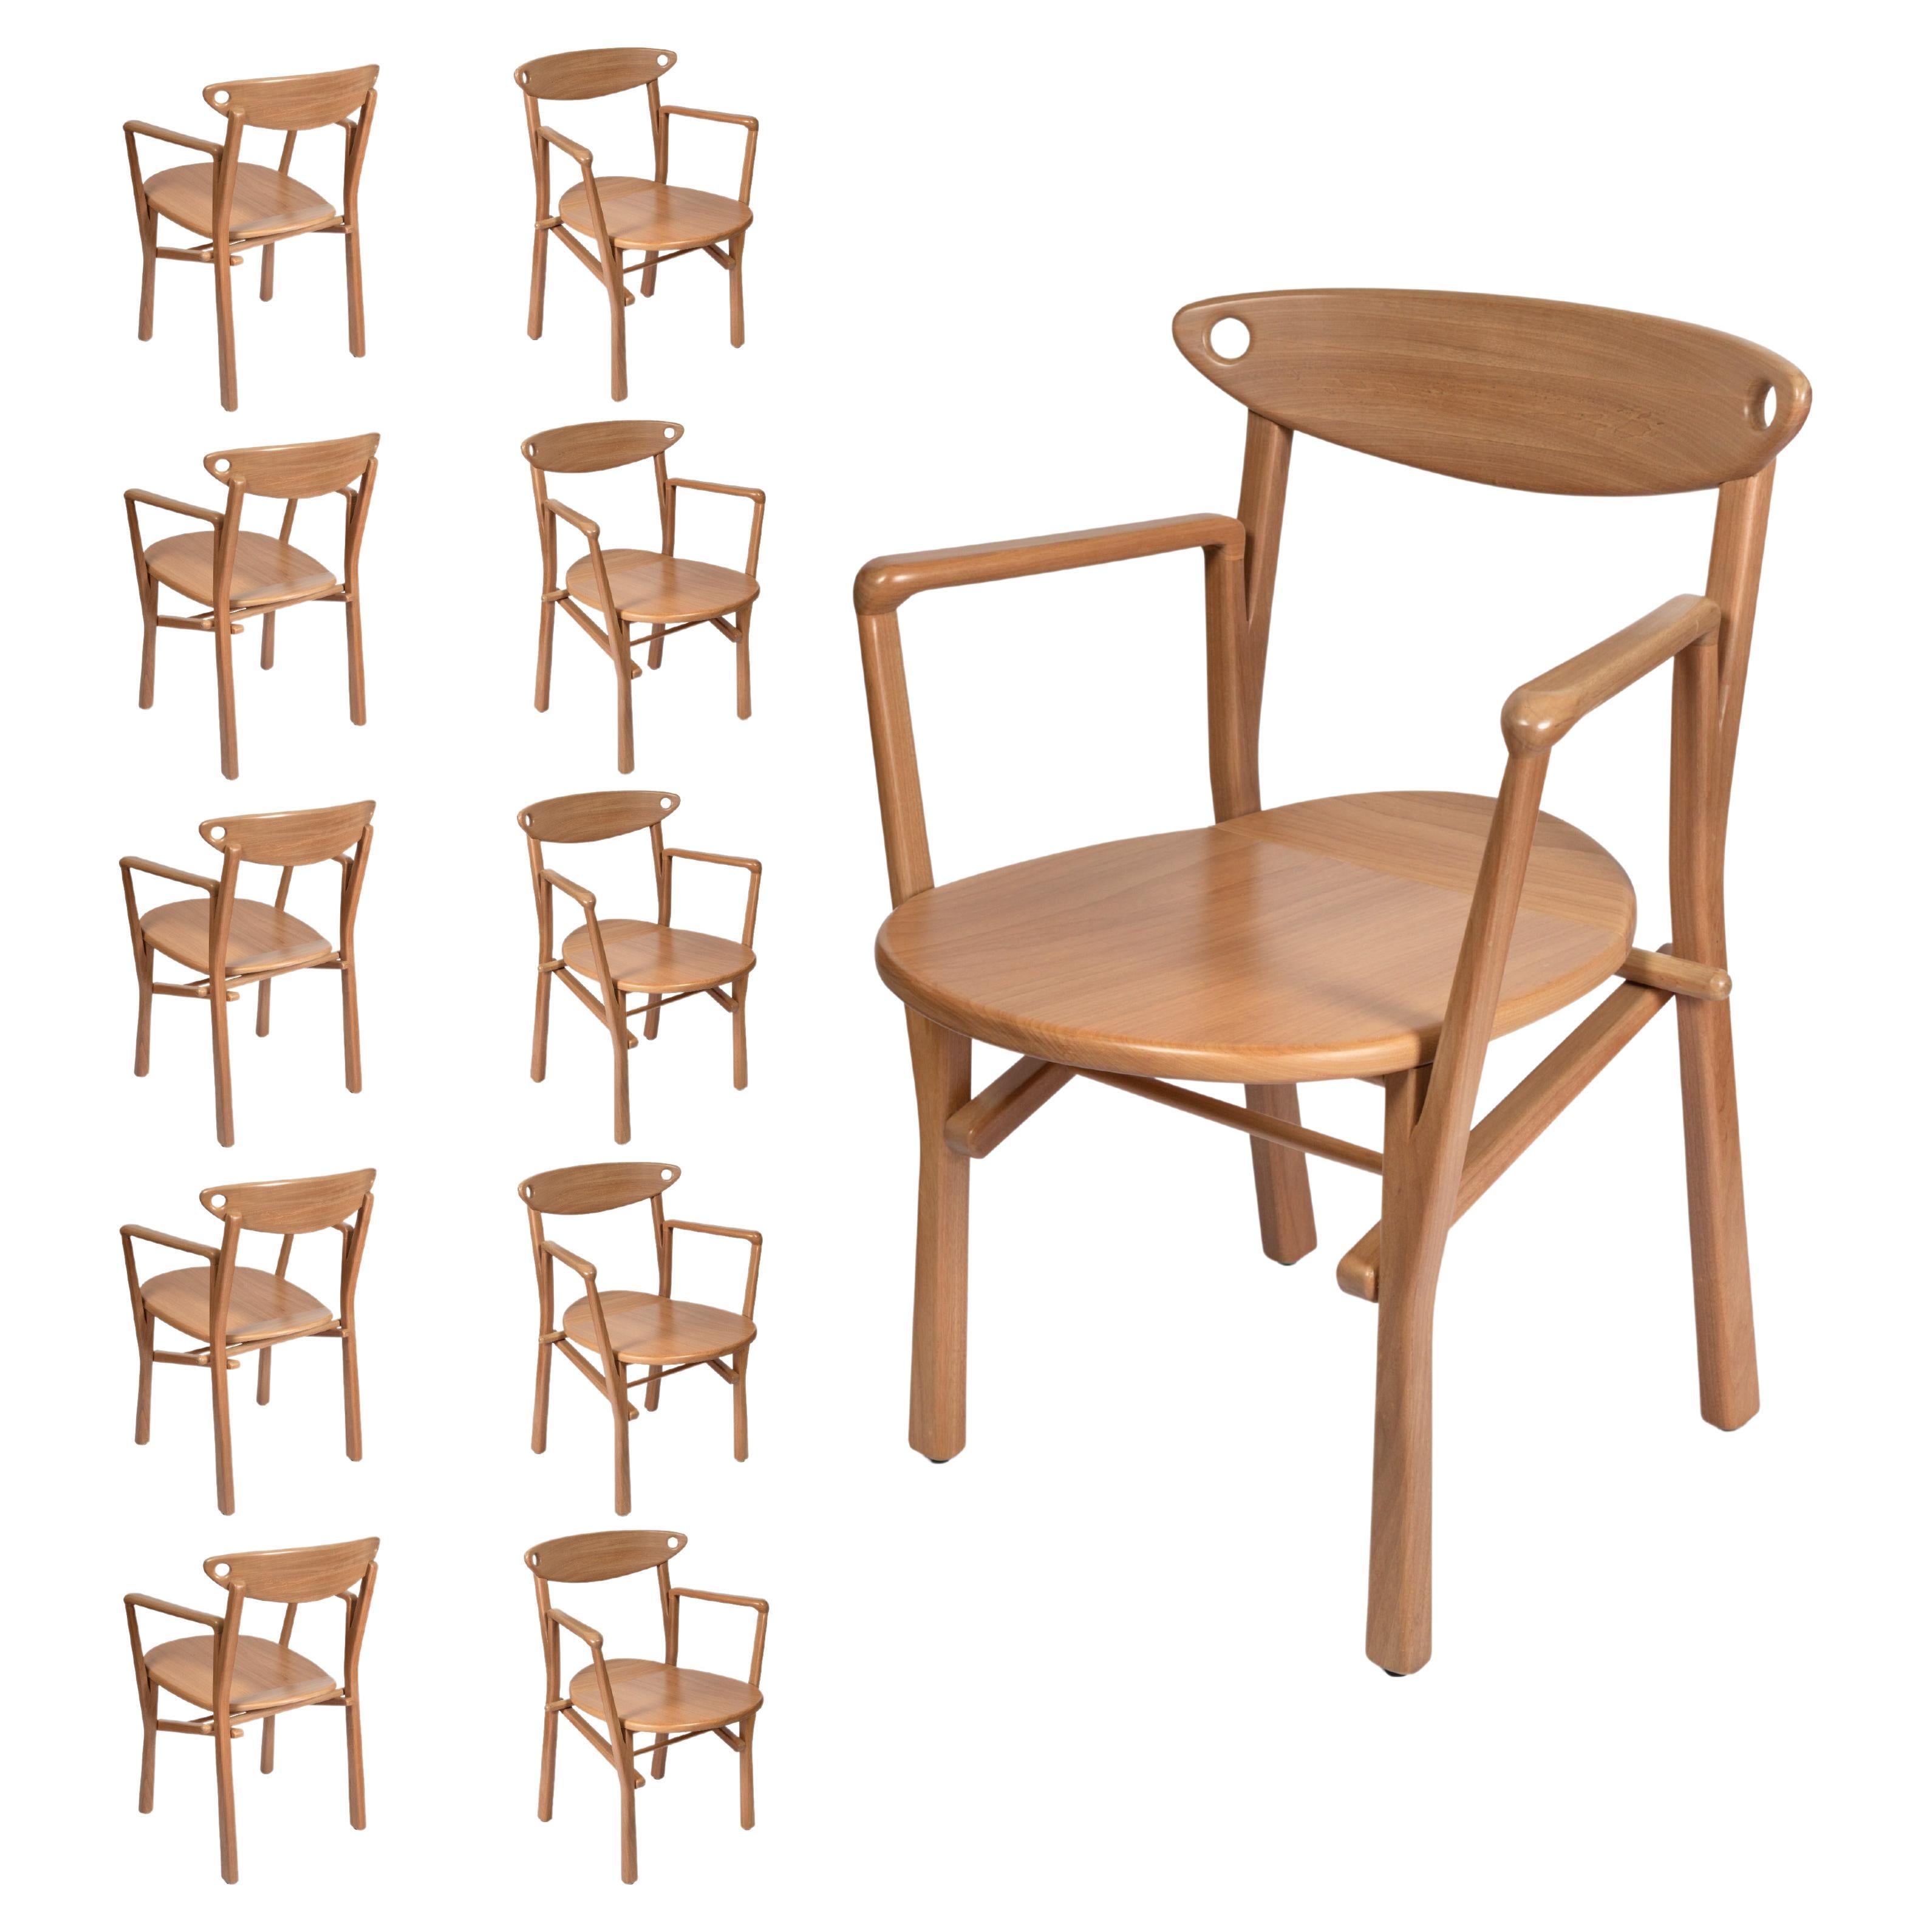 Set of 10 Dining Chairs Laje in Natural Wood For Sale